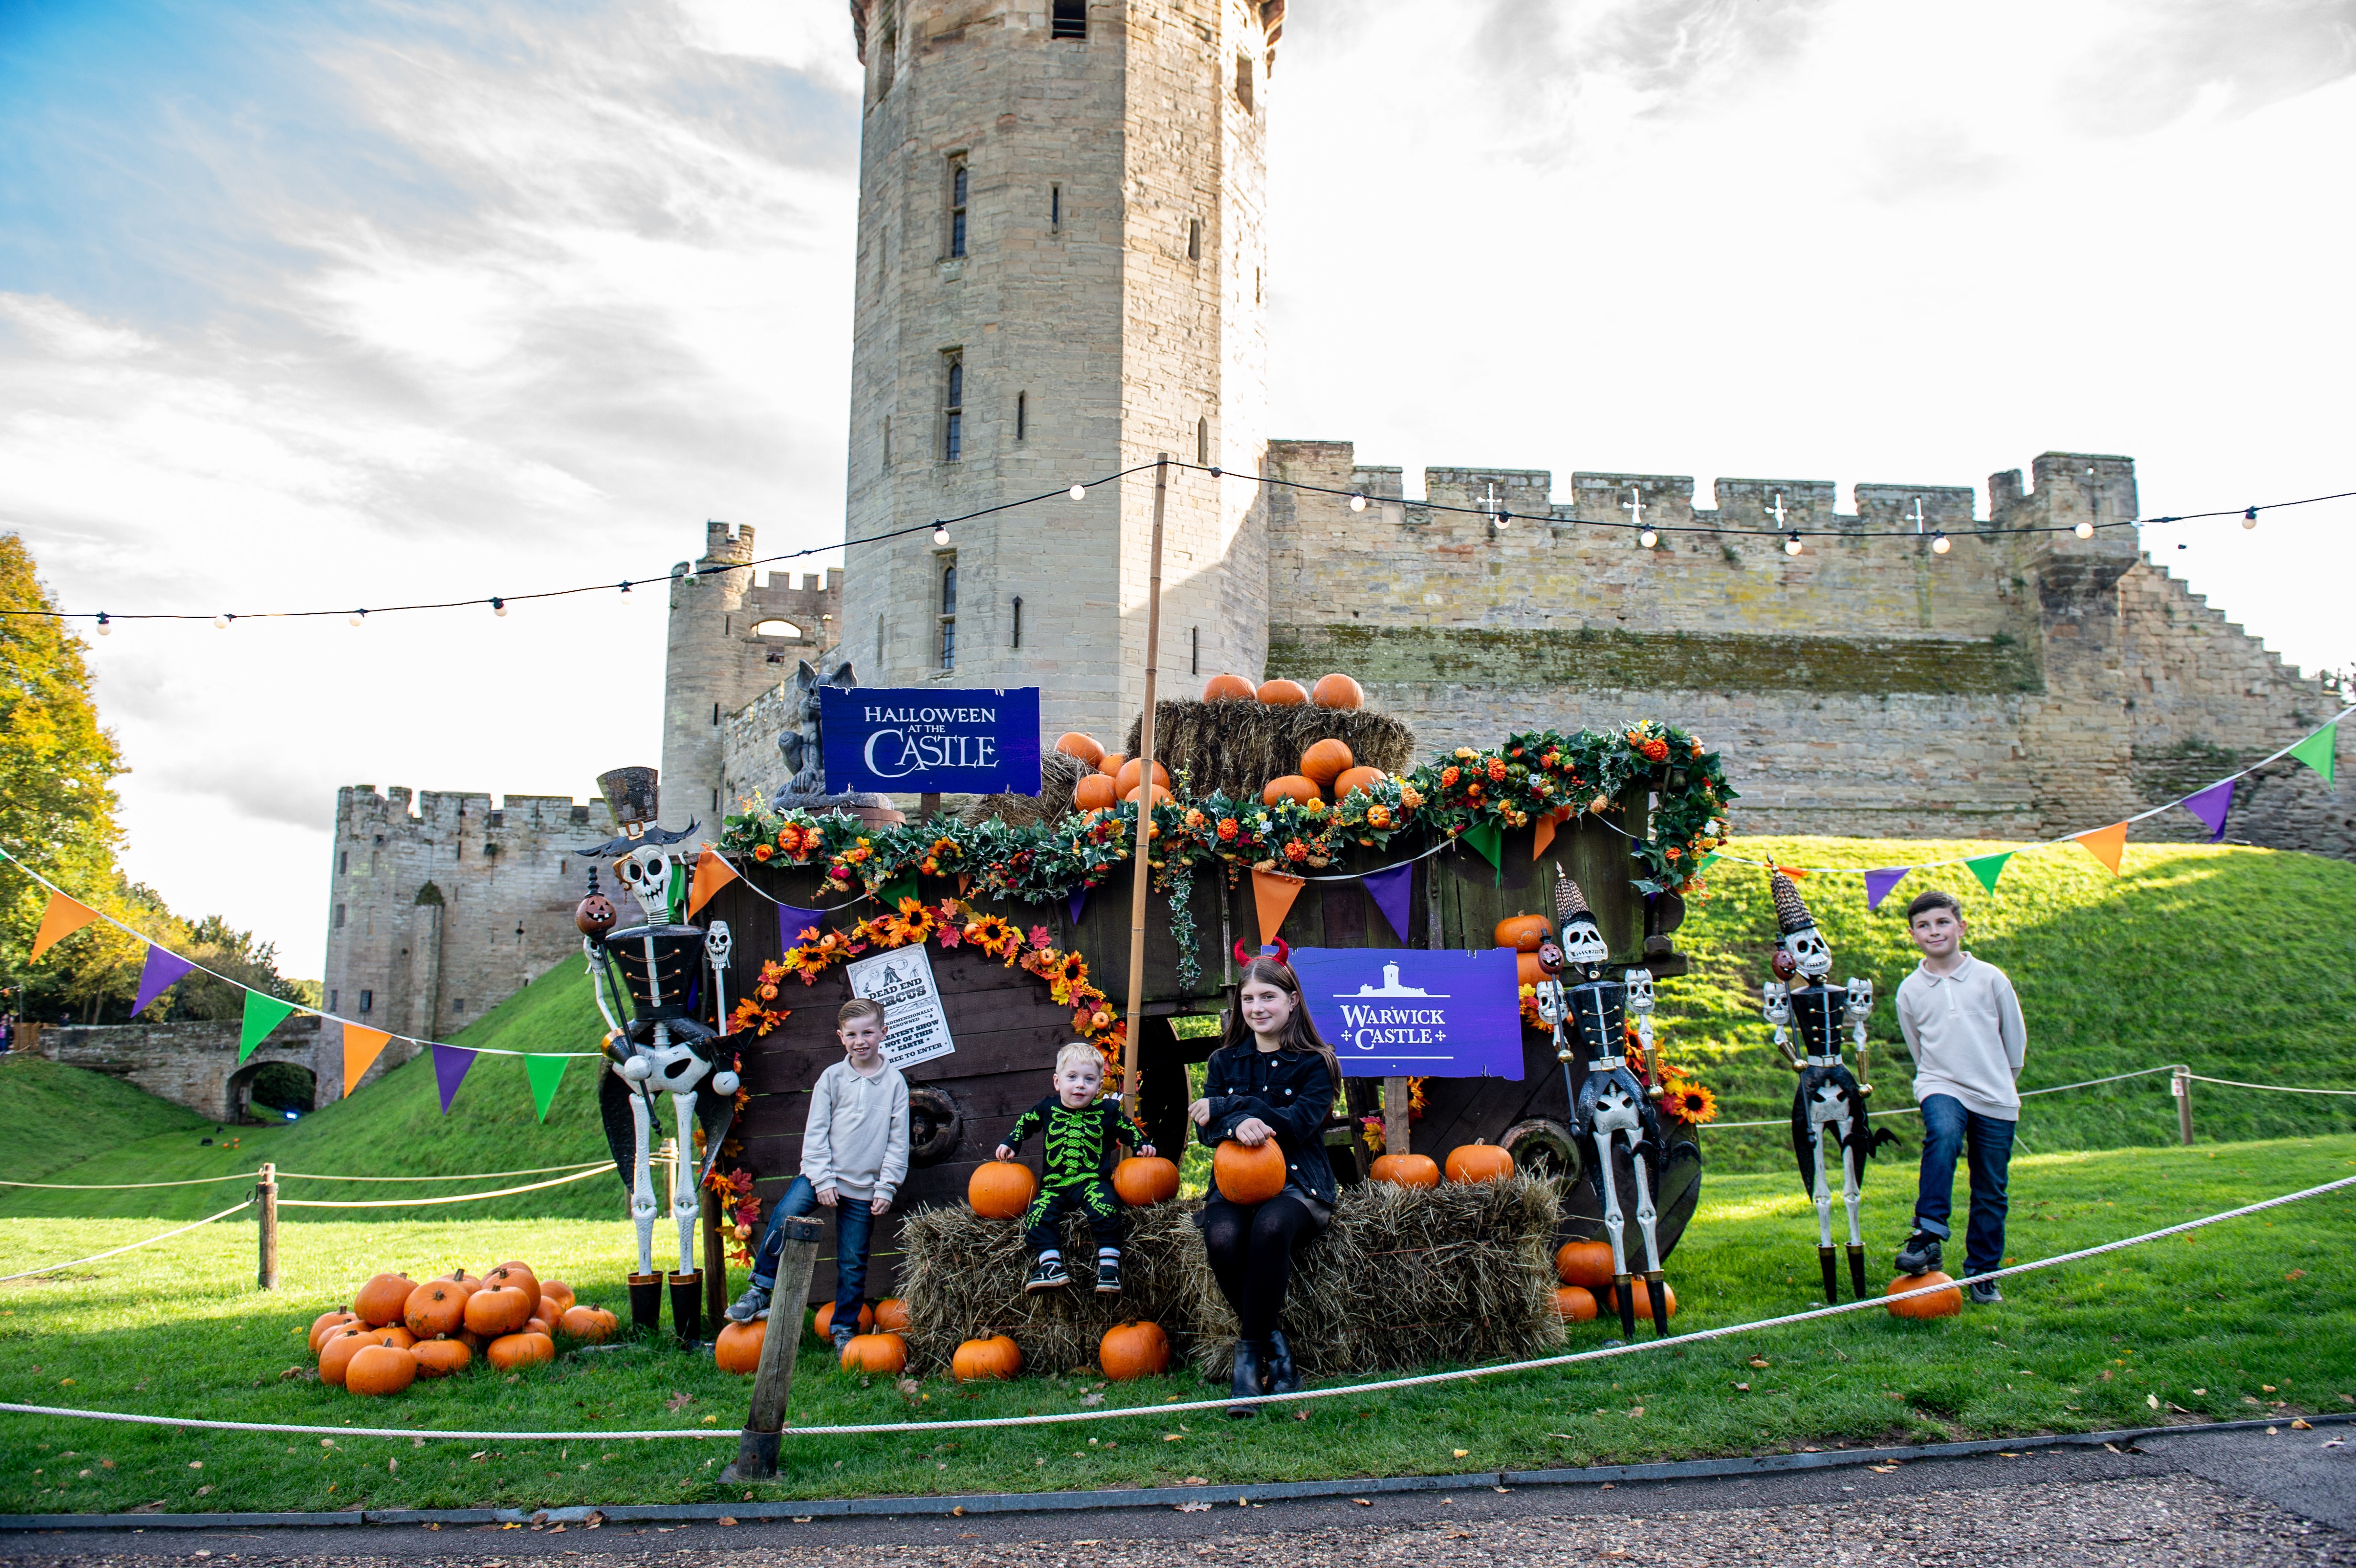 It’s a thousand years of haunting history and half-term family fun at Warwick Castle